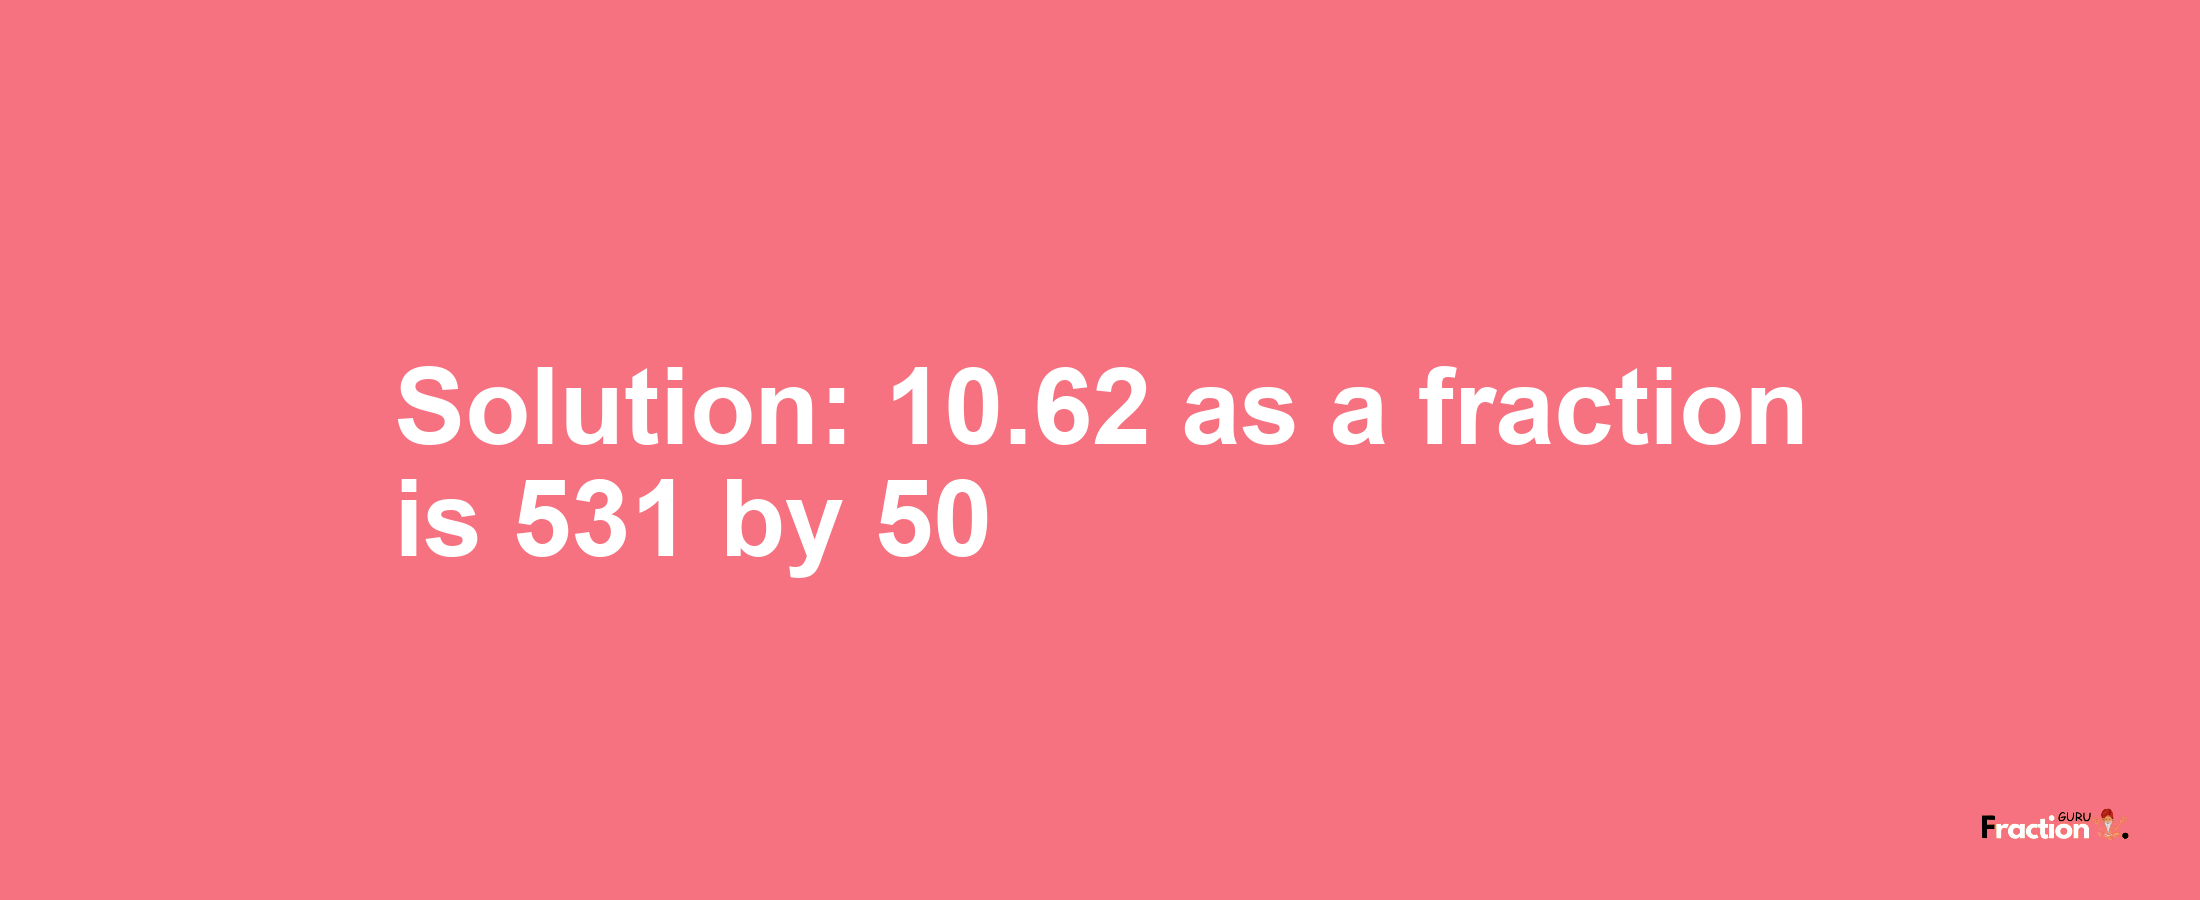 Solution:10.62 as a fraction is 531/50